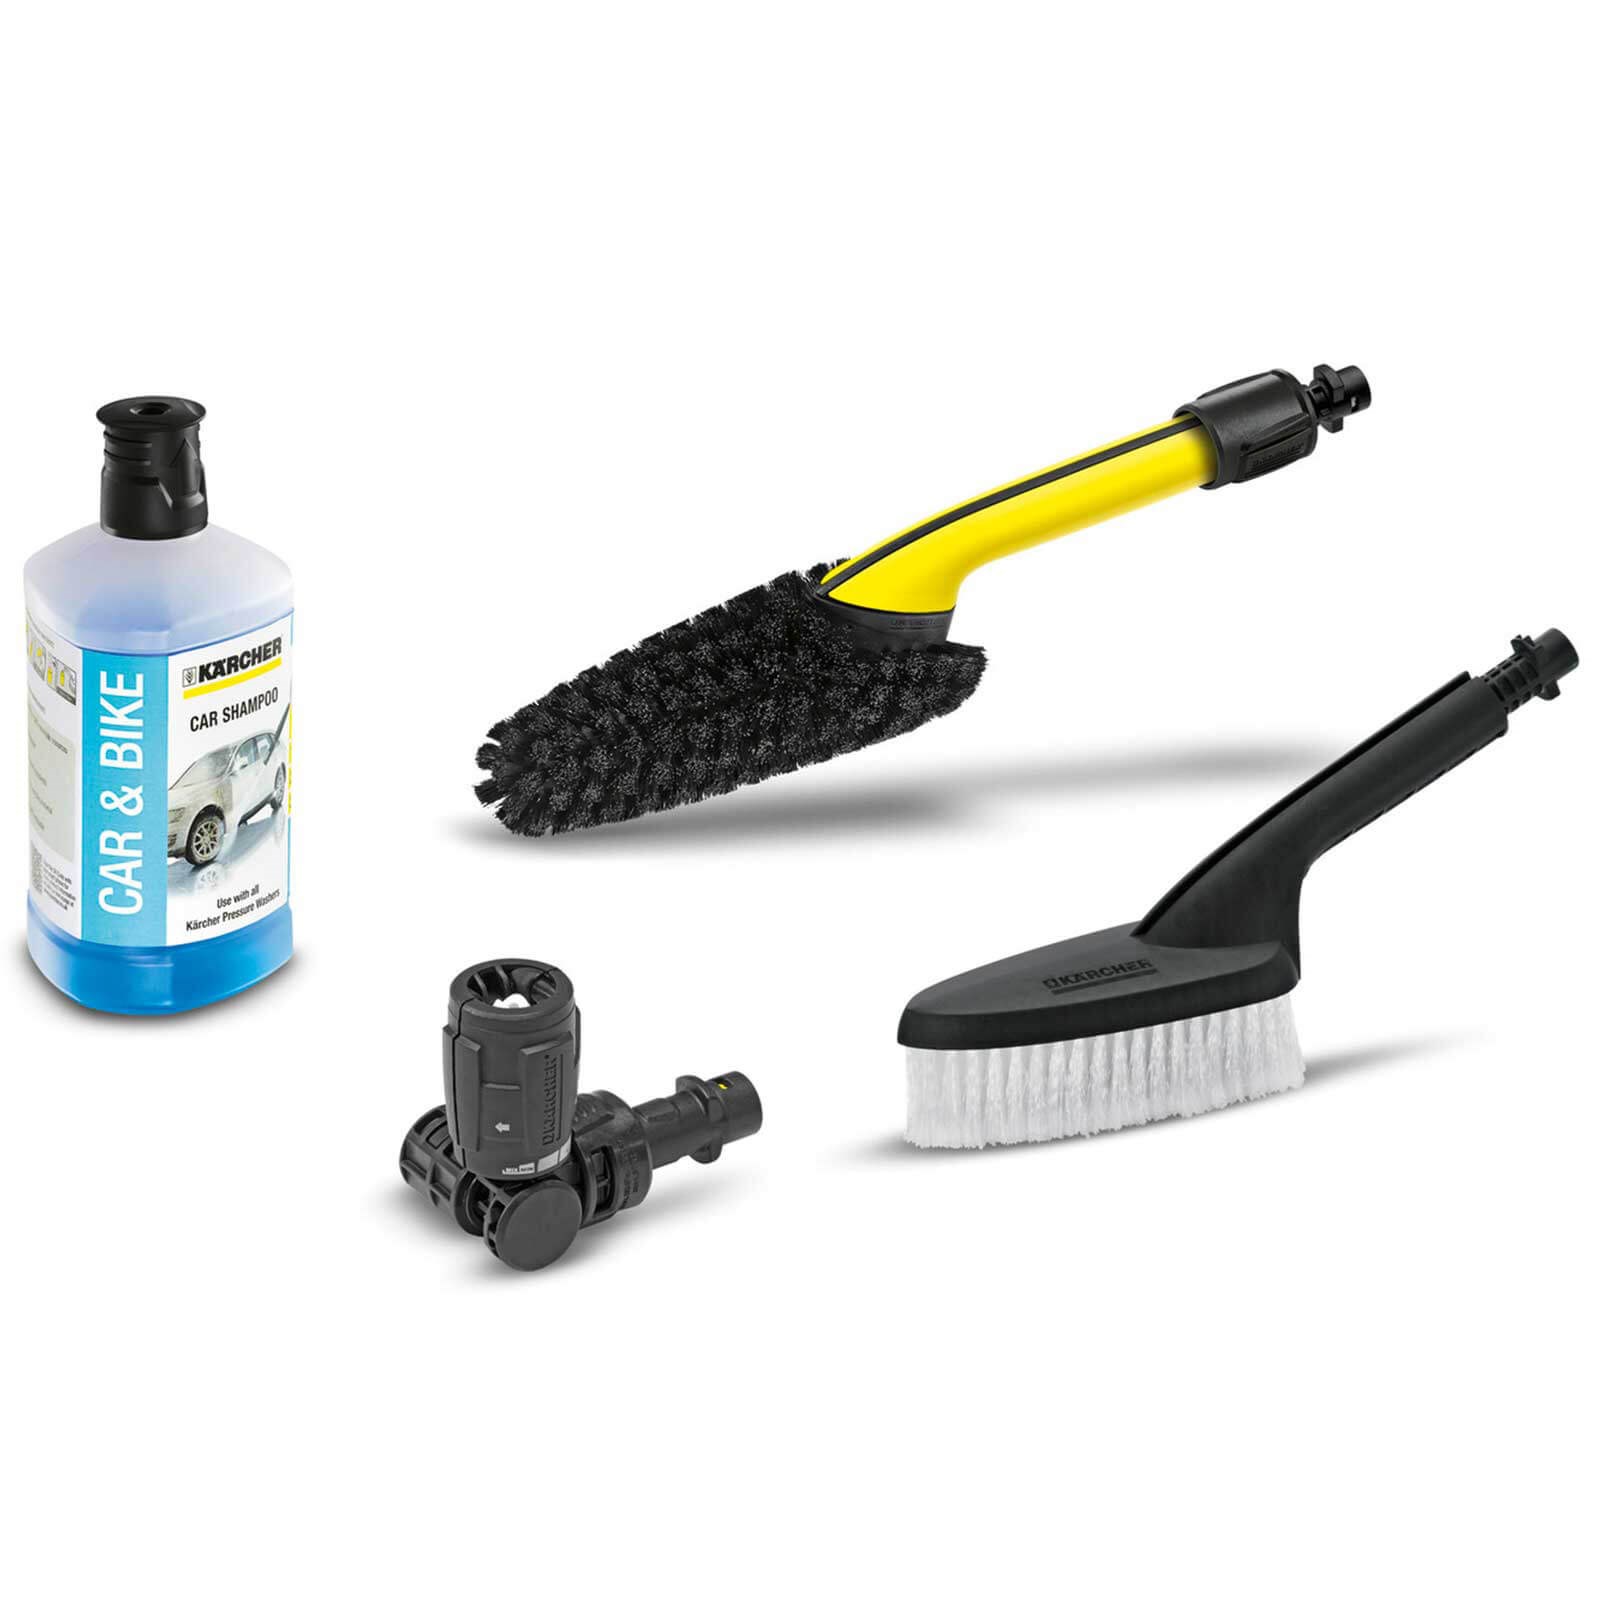 Karcher Bike, Car and Motorcycle Cleaning Kits